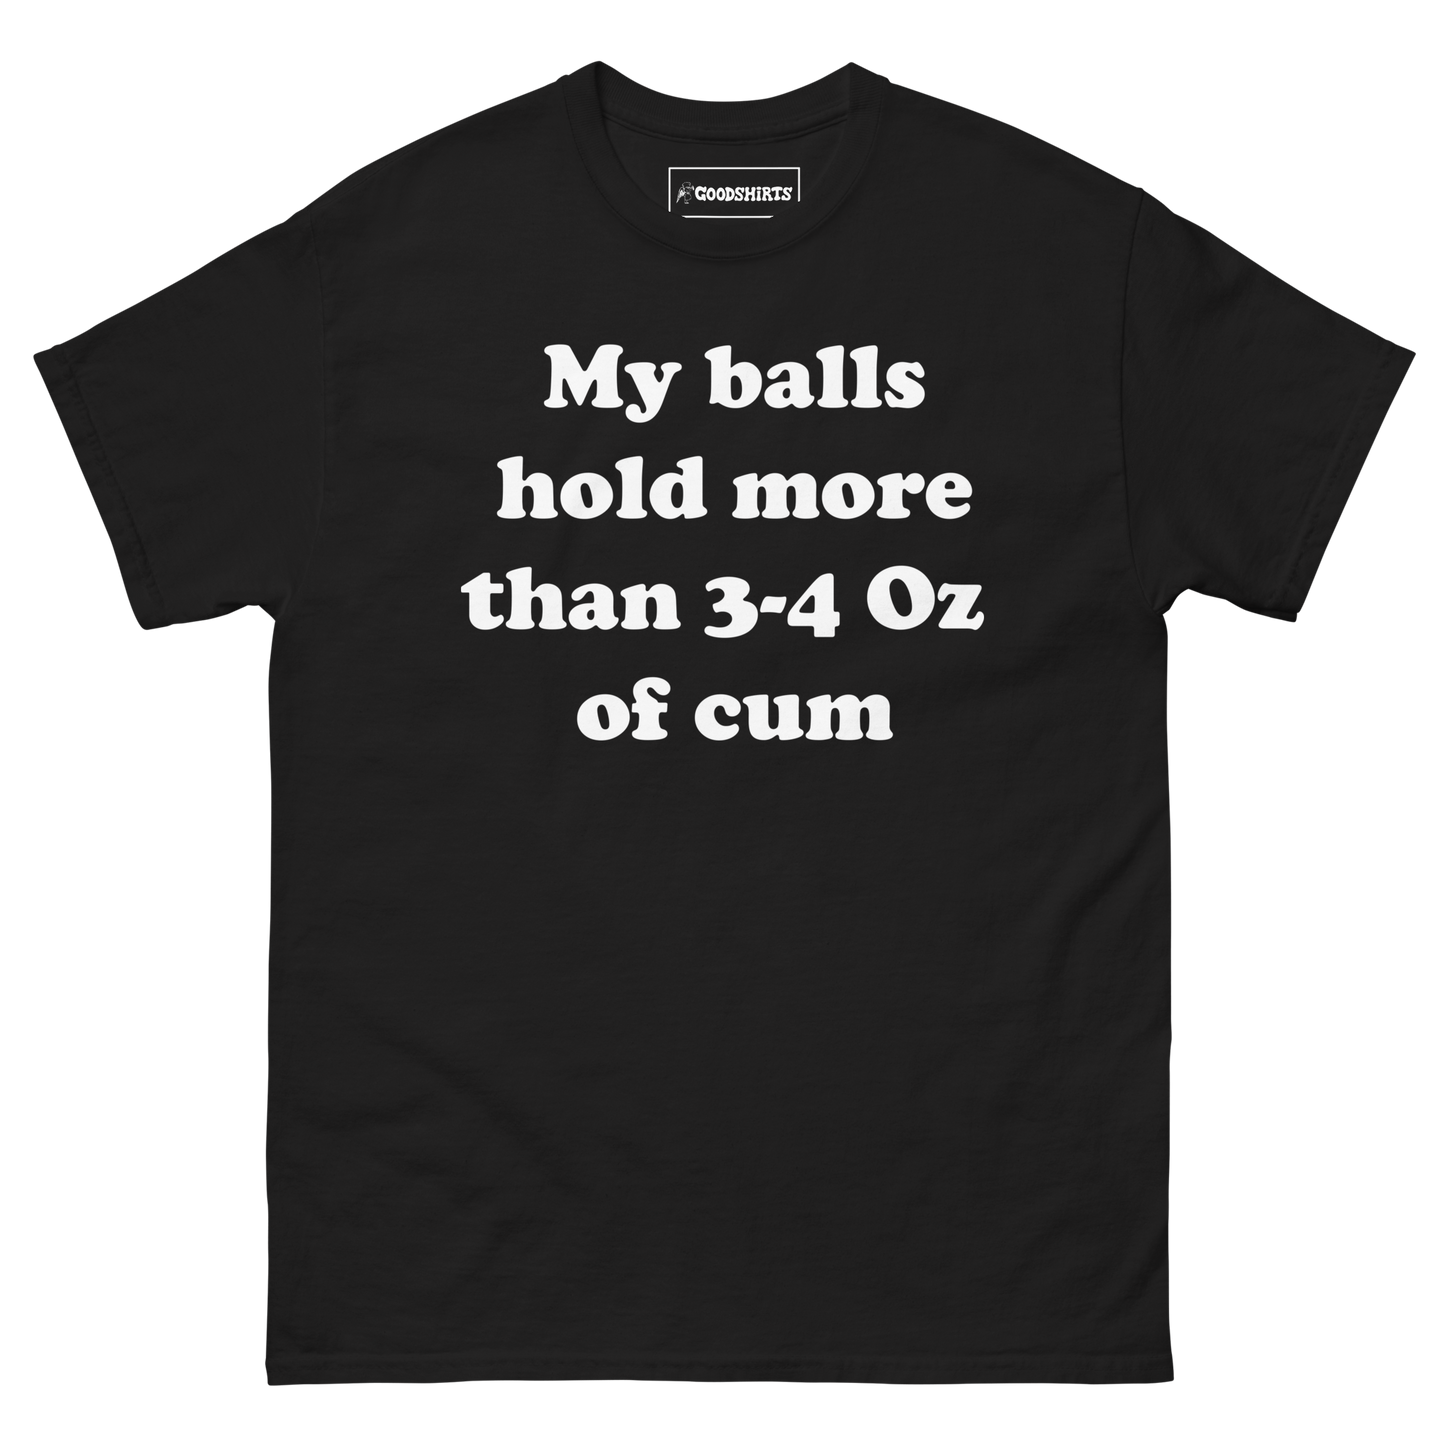 My Balls Hold More Than 3-4 Oz Of Cum.